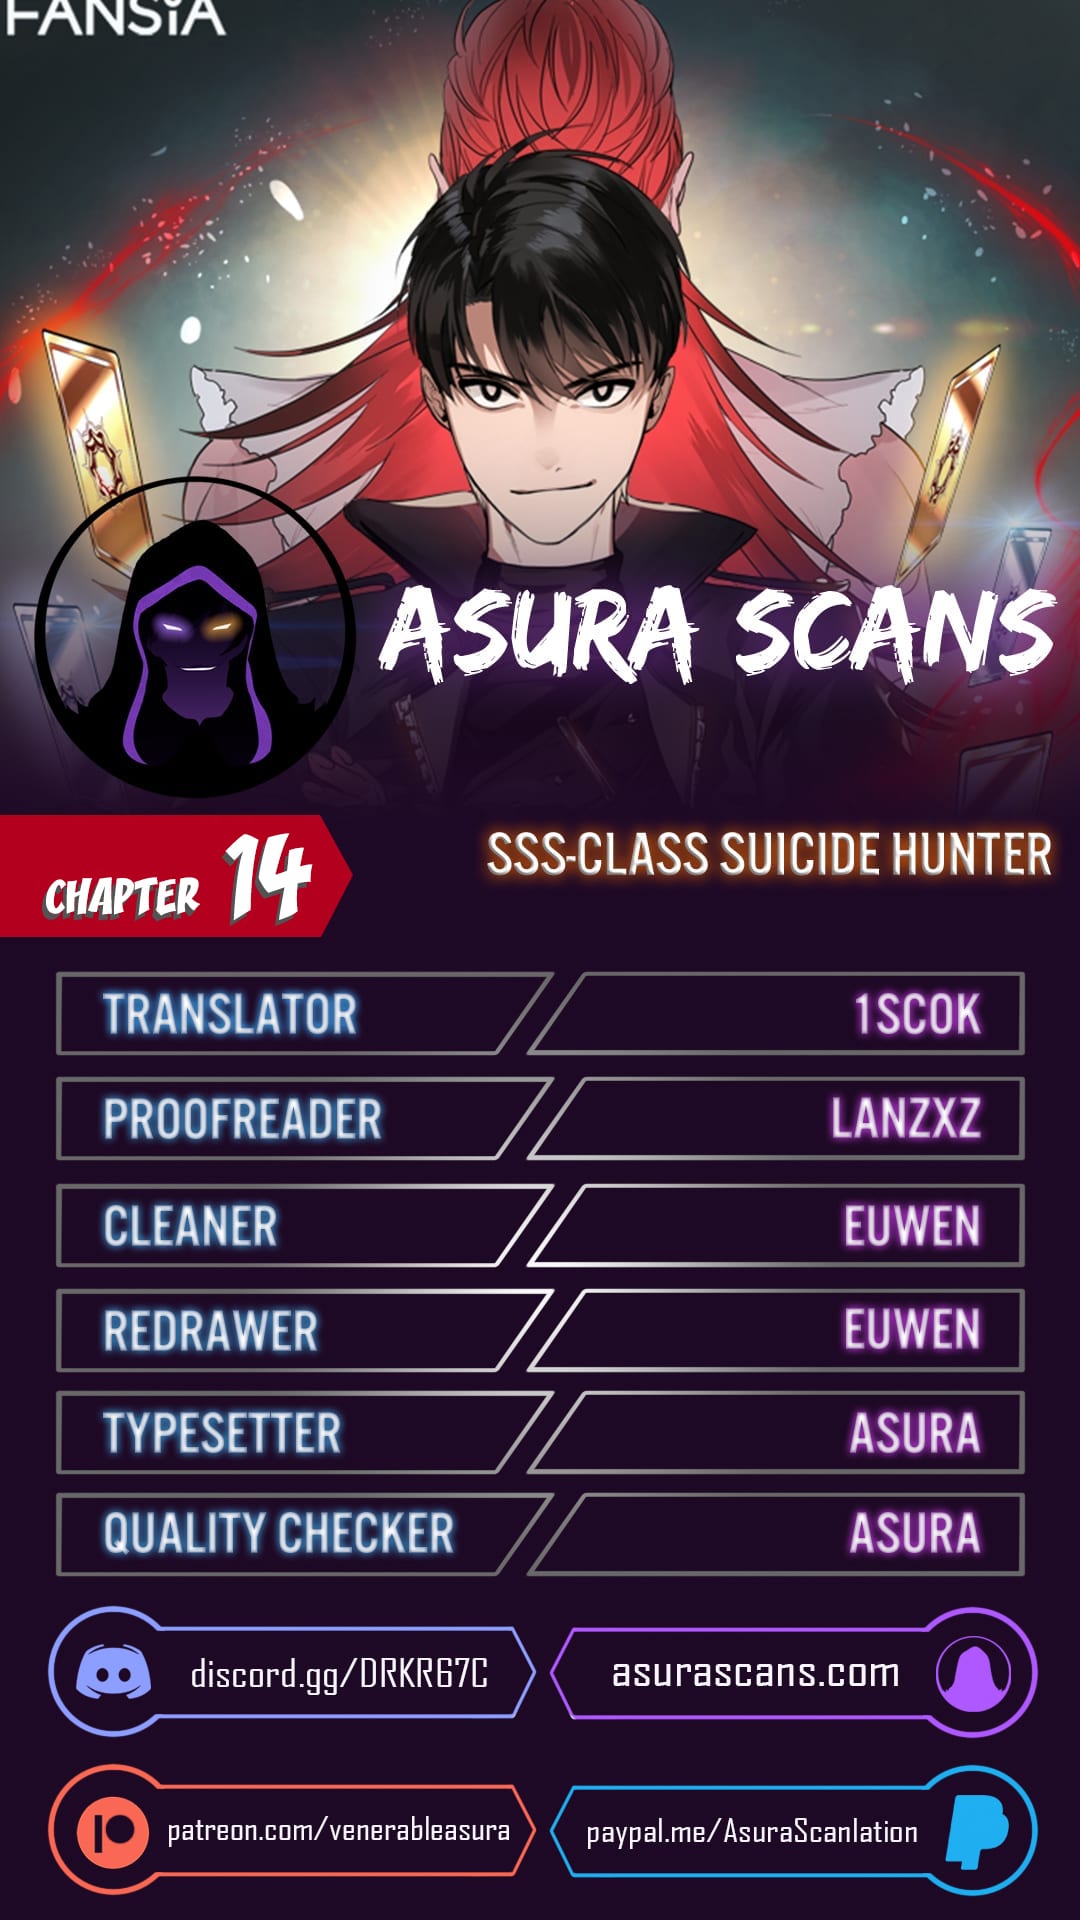 SSS-Class Suicide Hunter chapter 14